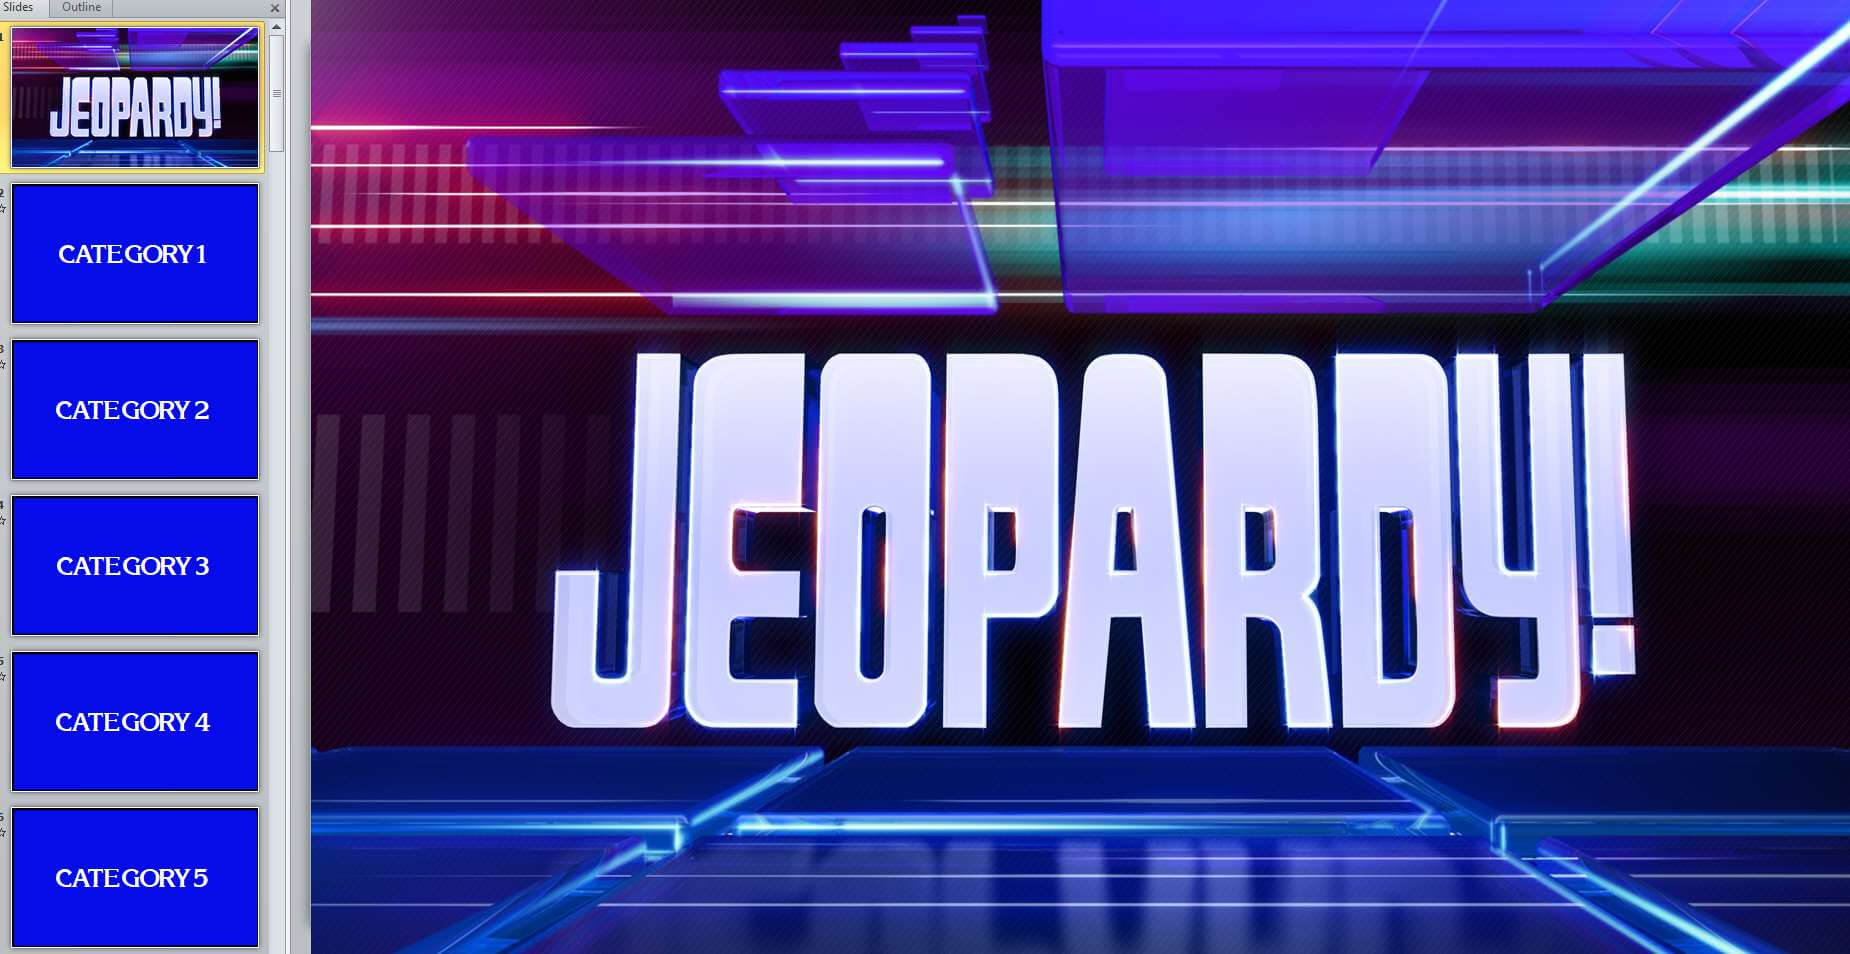 005 Jeopardy Powerpoint Template With Score Jeopardy2 Regarding Jeopardy Powerpoint Template With Sound